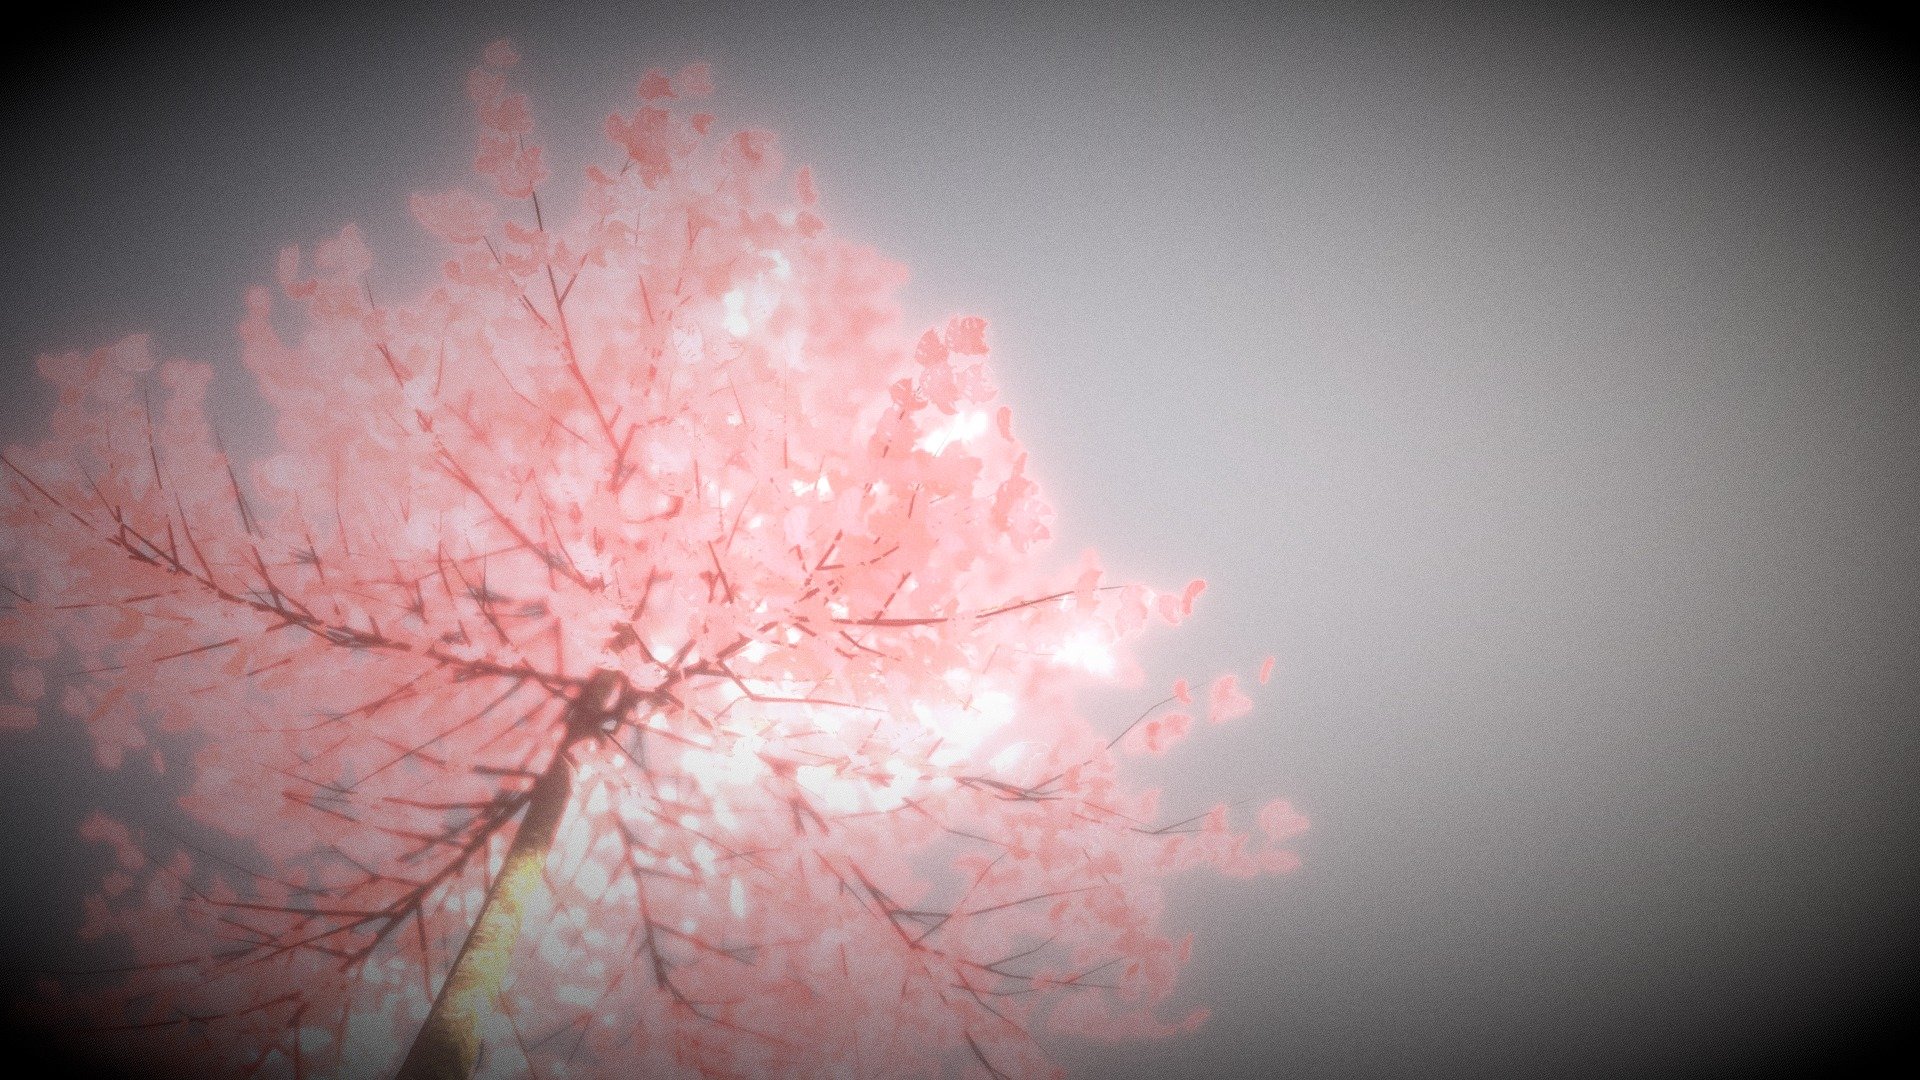 Support me post more free and better models by Patreon
I am also doing 3D modeling commissions, and please contact me by chambersu1996@gmail.com for more information~

Here is a tree with Pink Leaves and wind. Try to match the memory about laying under a big tree, while maybe I have not did such a thing in real life.
I will build a tree through the all seasons 3d model